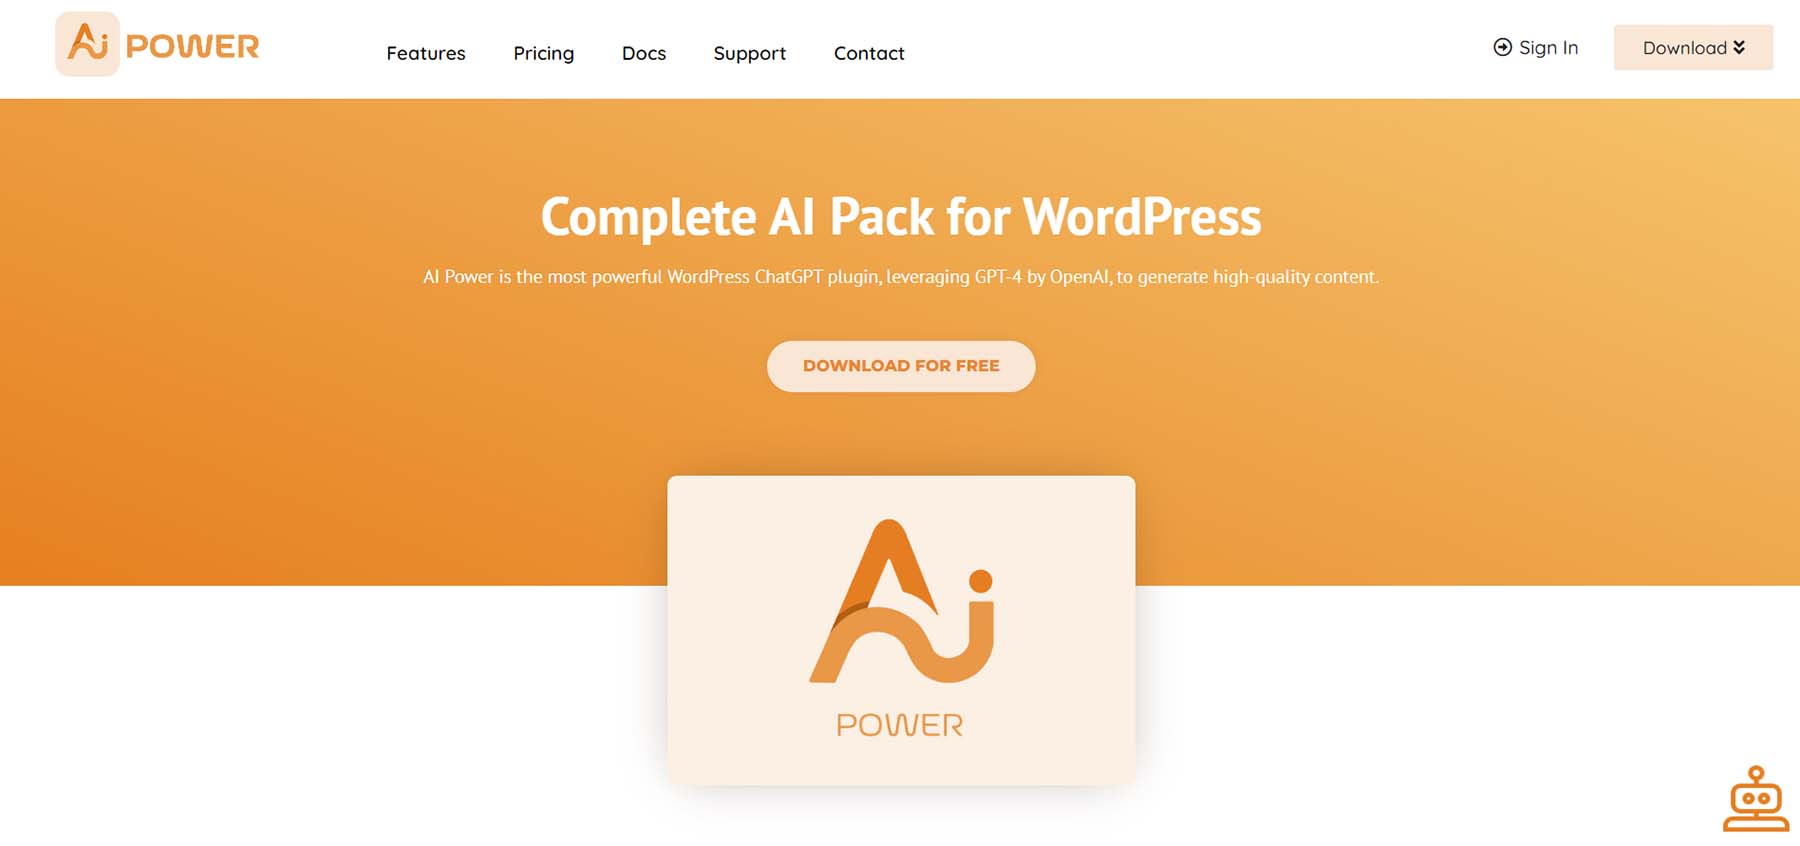 AI Power, a complete AI pack for WordPress